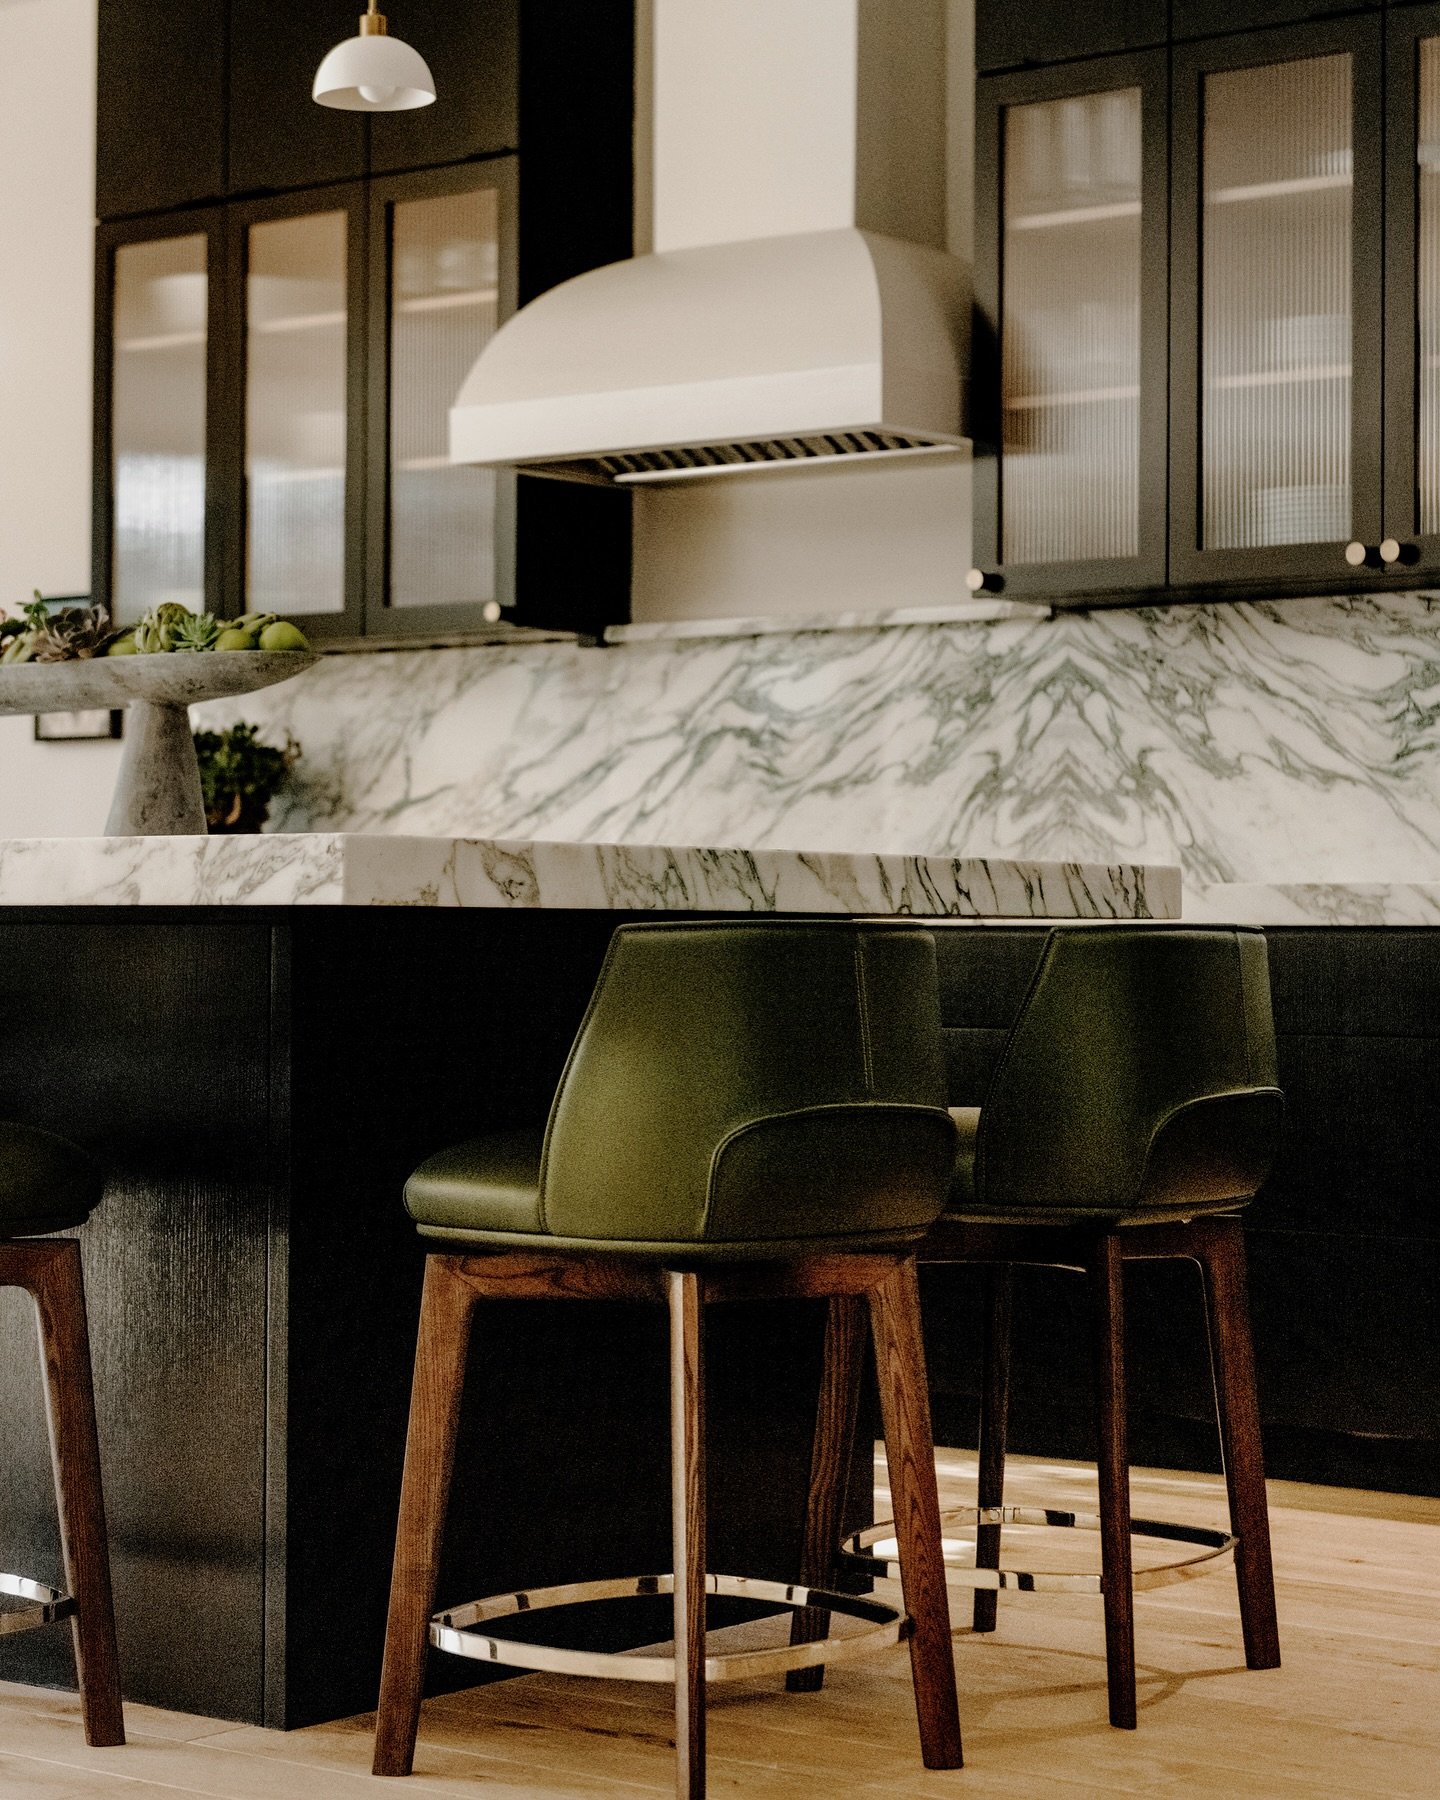 The story of the stone: &ldquo;It took the whole team to find the right marble for this kitchen,&rdquo; says interior designer, @cassiejdesigns. &ldquo;We knew we wanted a statement, but not something overpowering. We ended up finding the perfect Ara